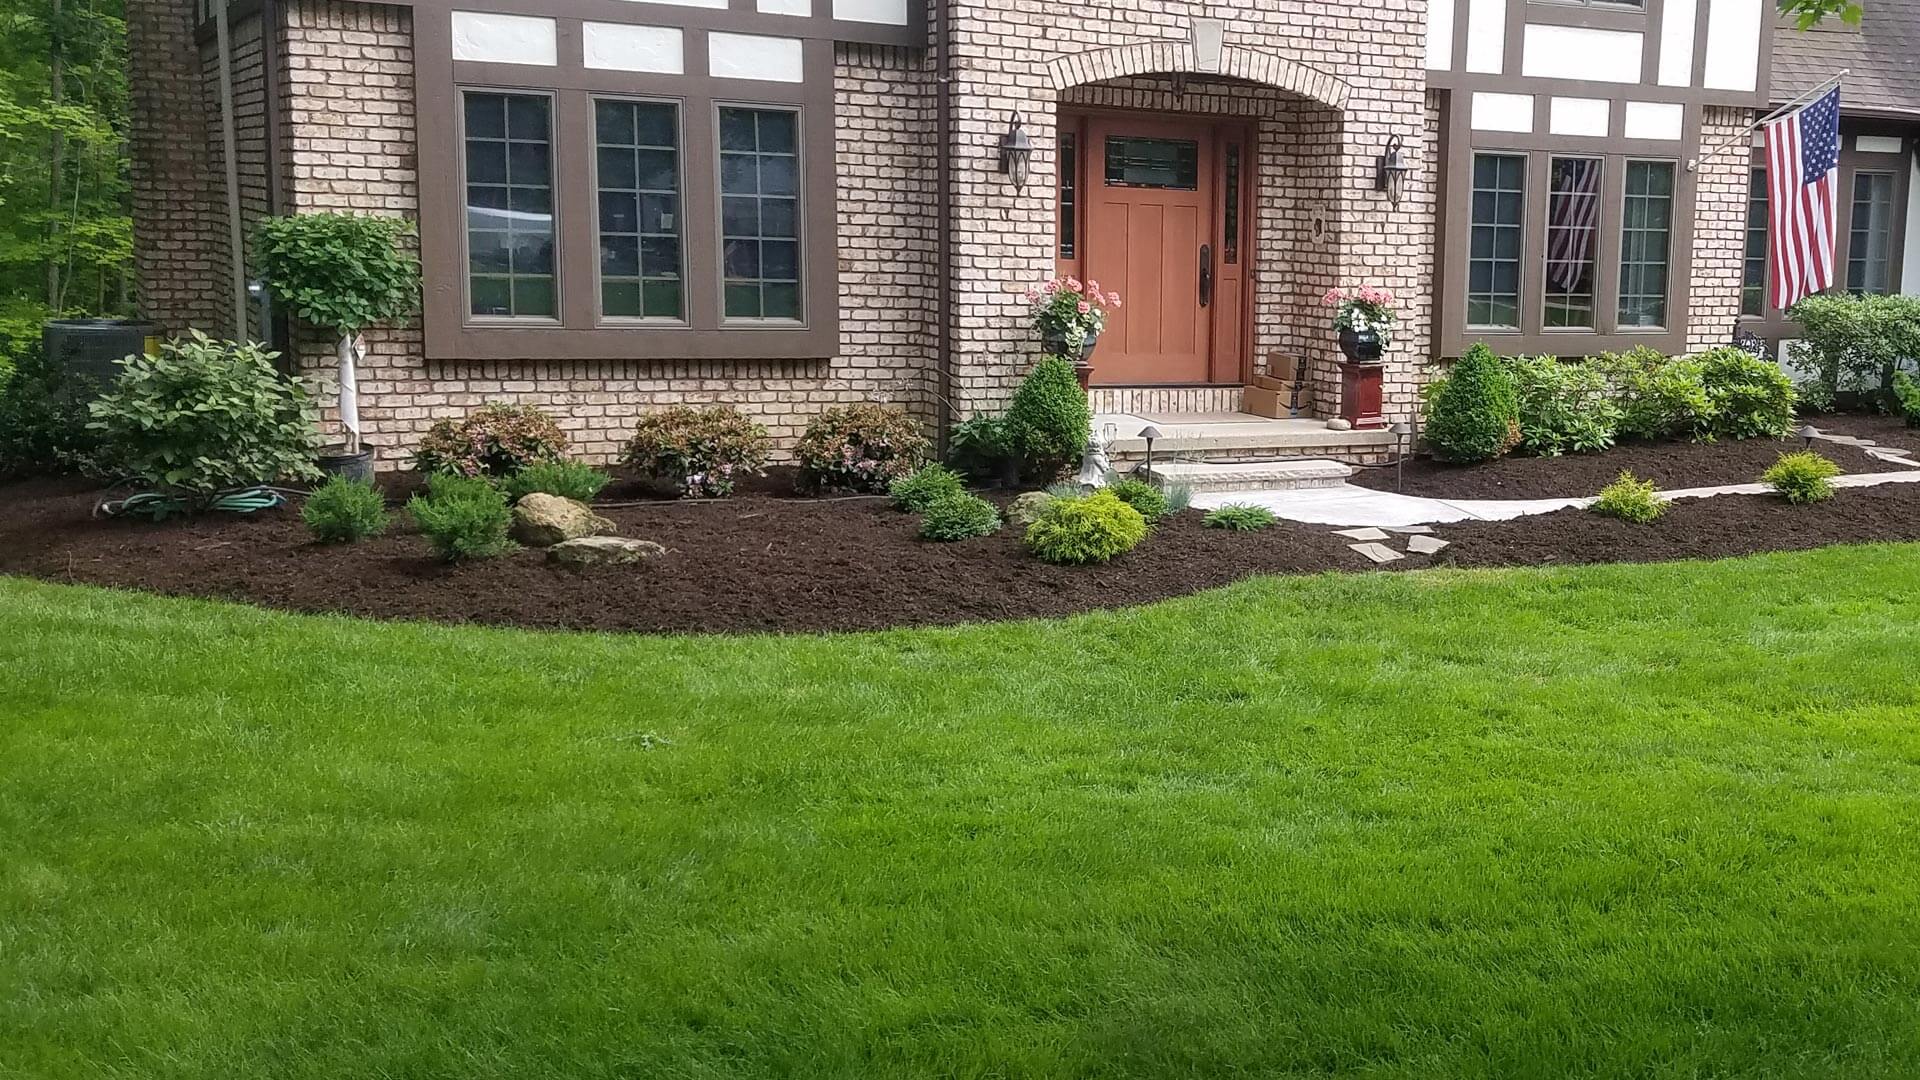 Residential yard after a fall clean up with re-shaped landscape beds, new mulch, and trimmed grass in Medina, OH.